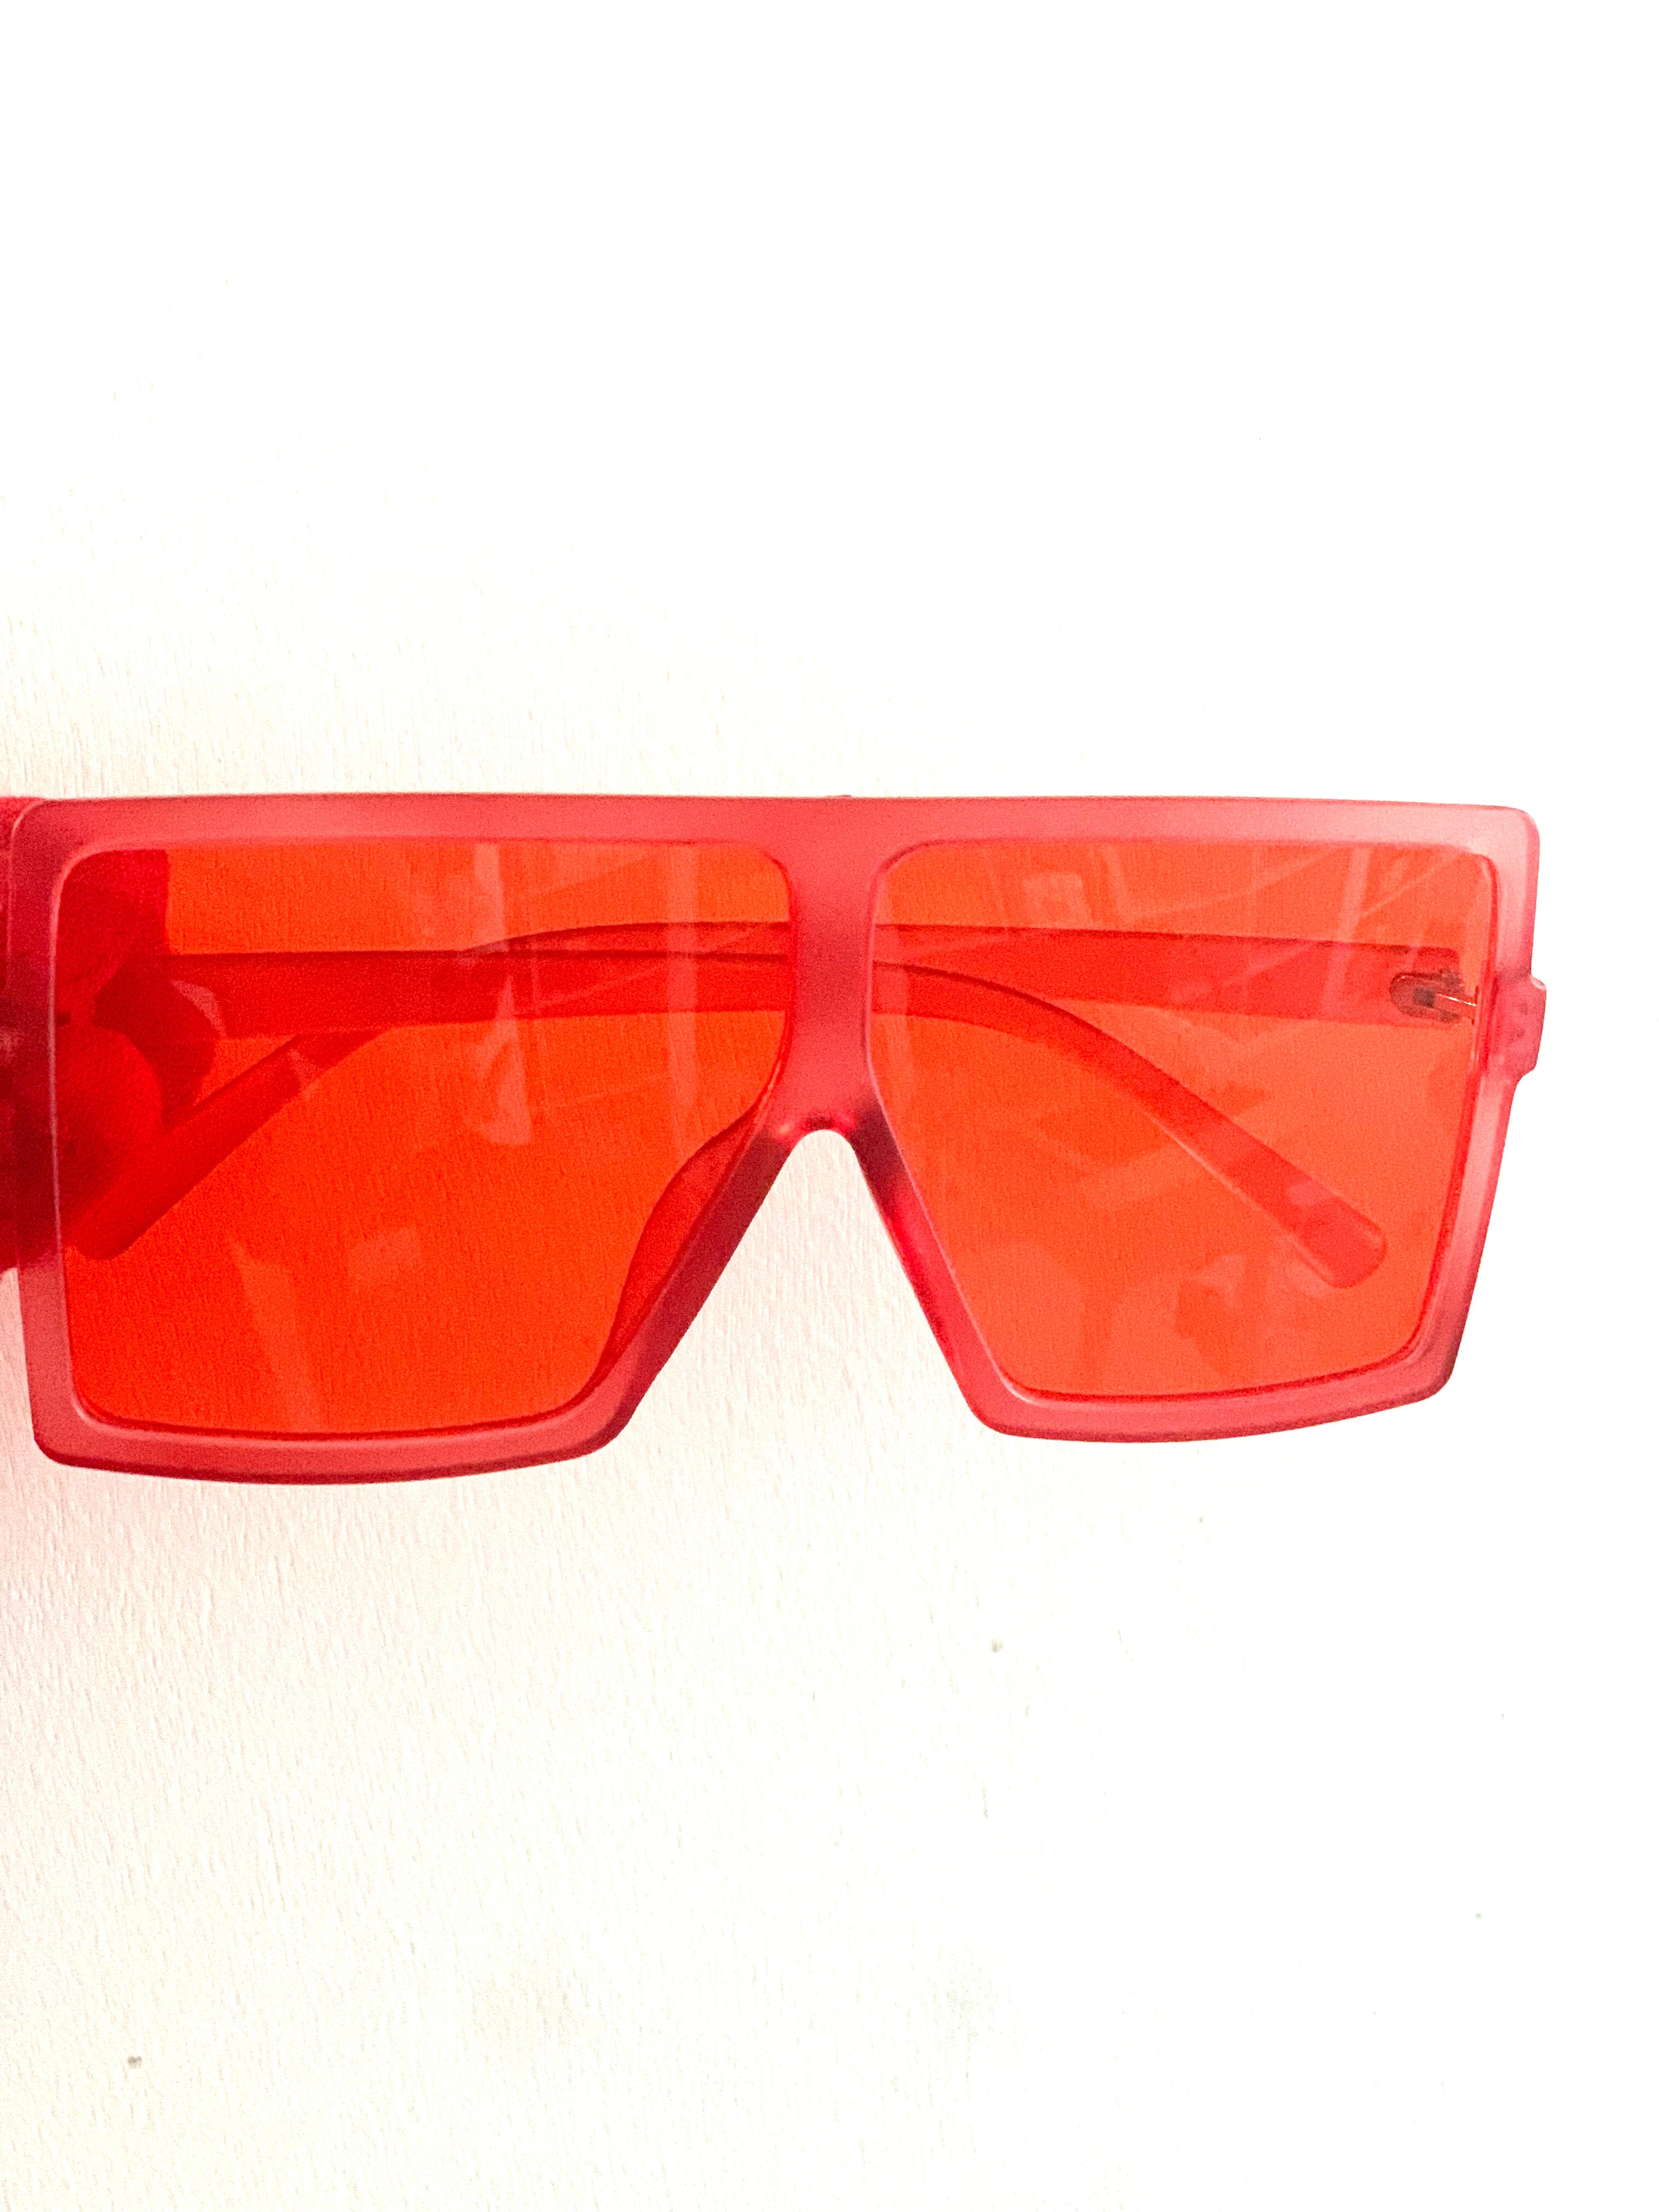 “Boujee” adult Sunglasses Red